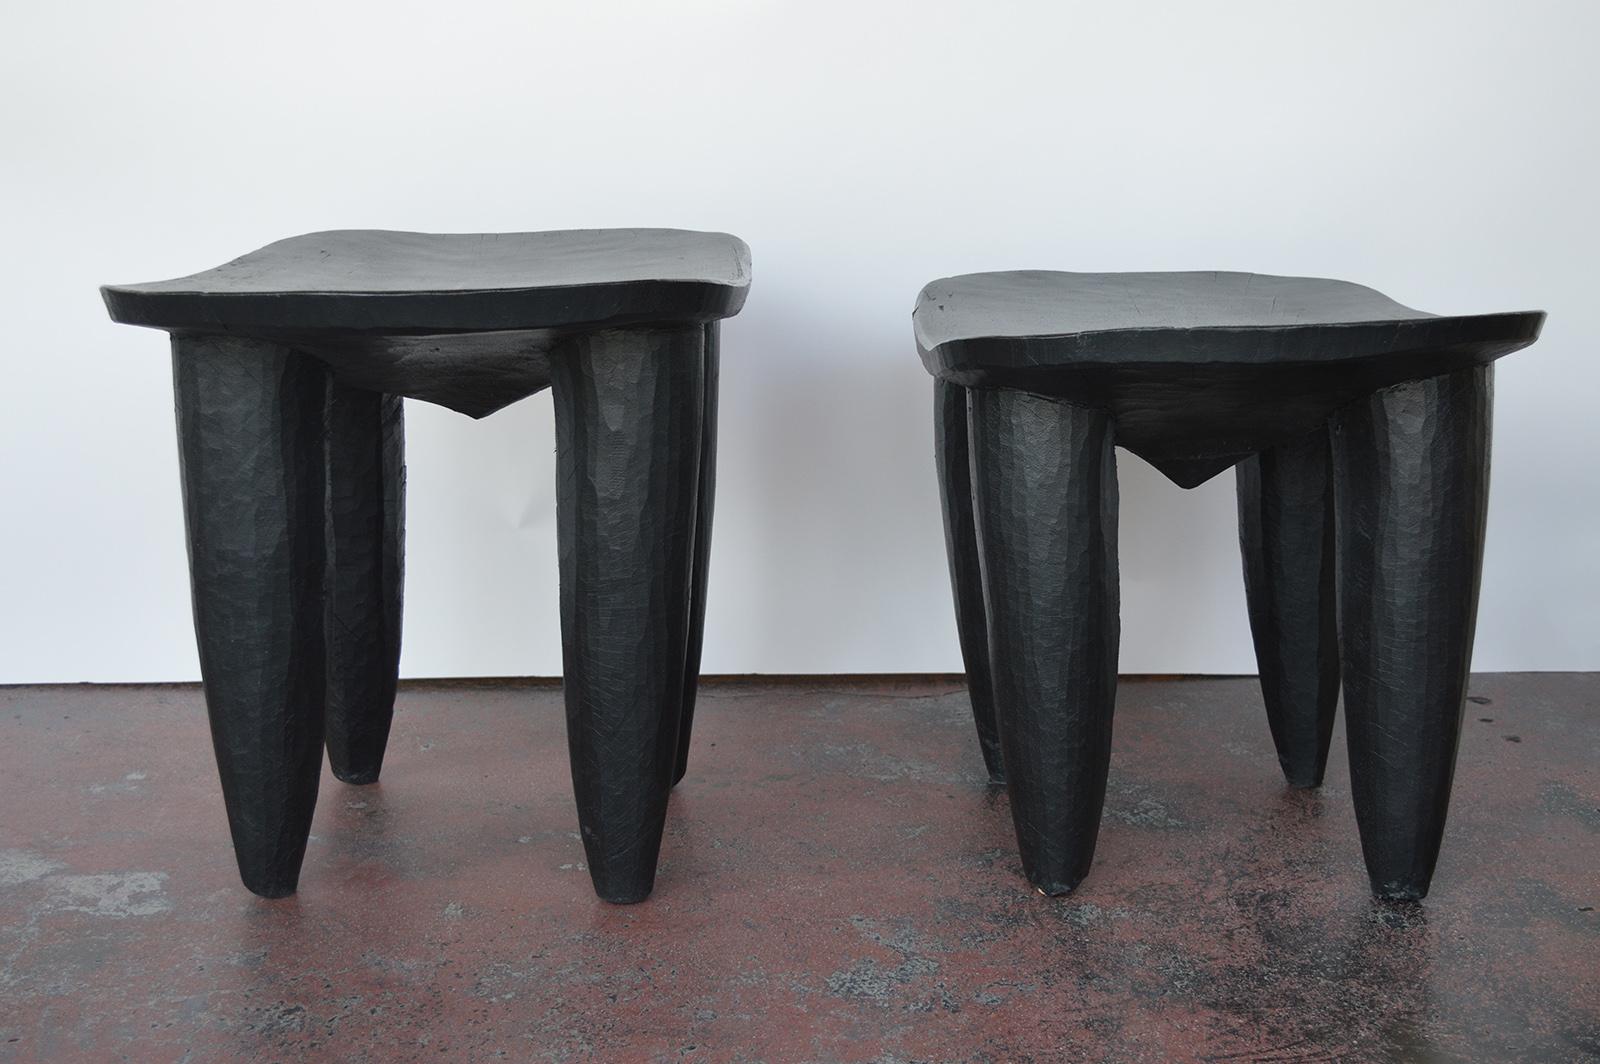 Two hand-carved wood side tables or stools, painted black.
Smaller stool measures, 18 inches H x 24 inches W x 17.5 inches D.